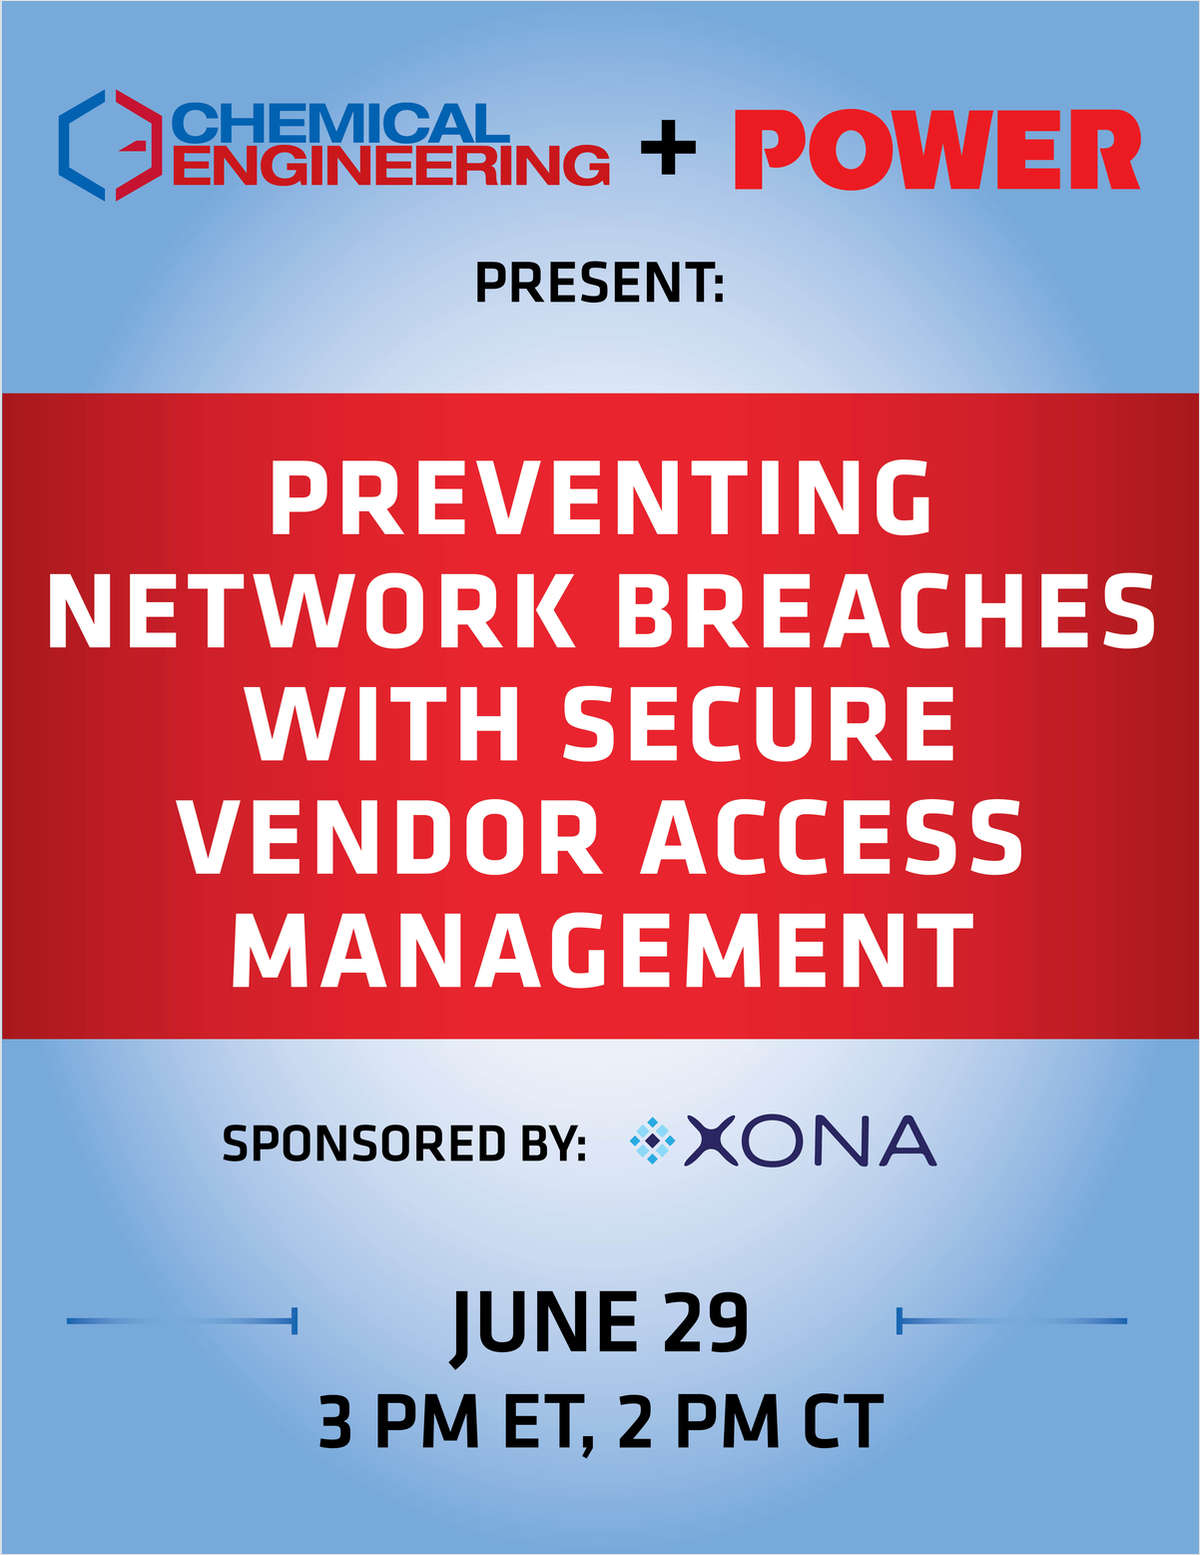 Preventing Network Breaches with Secure Vendor Access Management